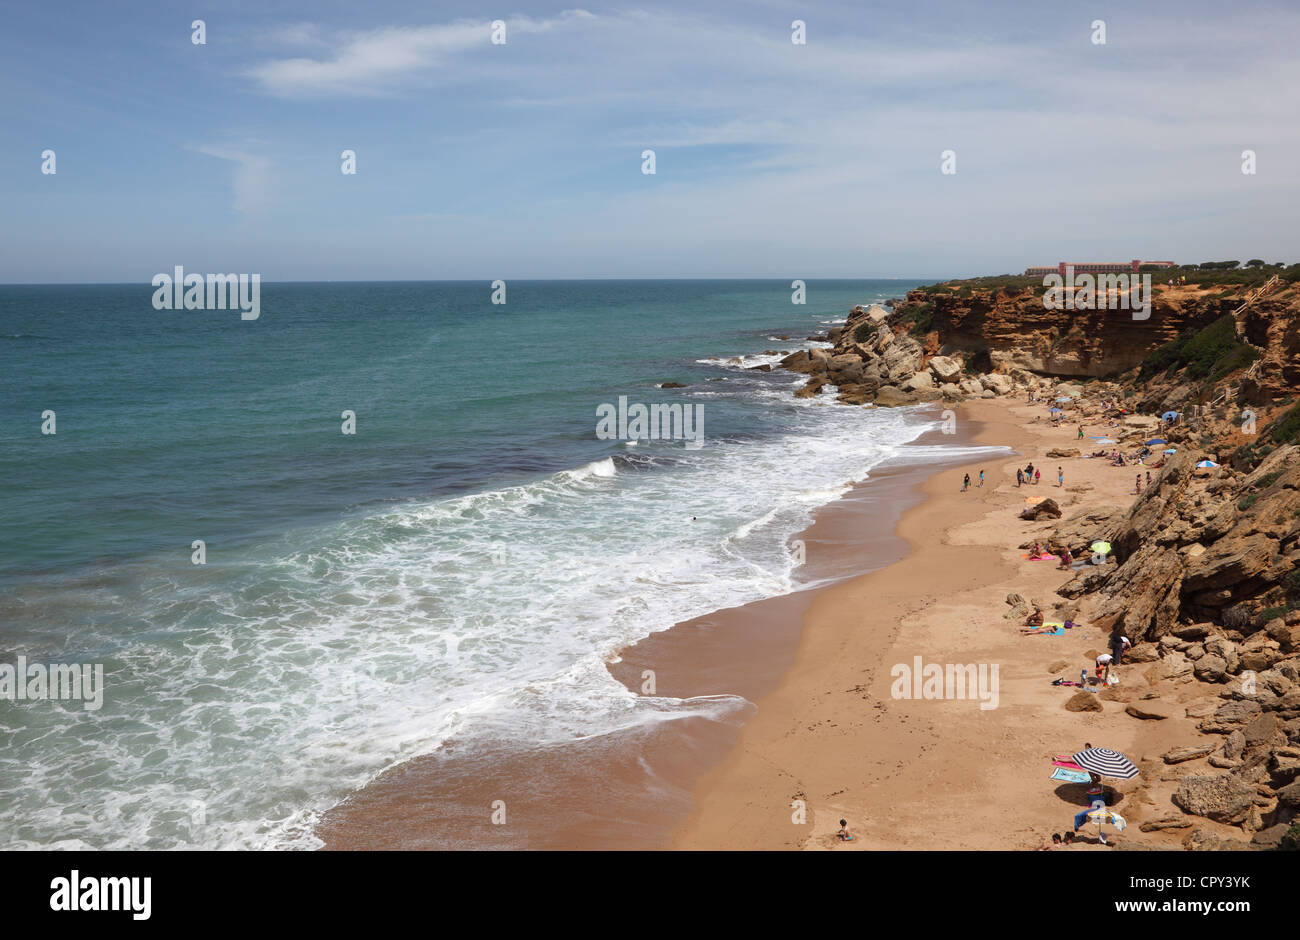 Panoramic View Of Conil De La Frontera In Southern Spain At Sunset Stock  Photo - Download Image Now - iStock